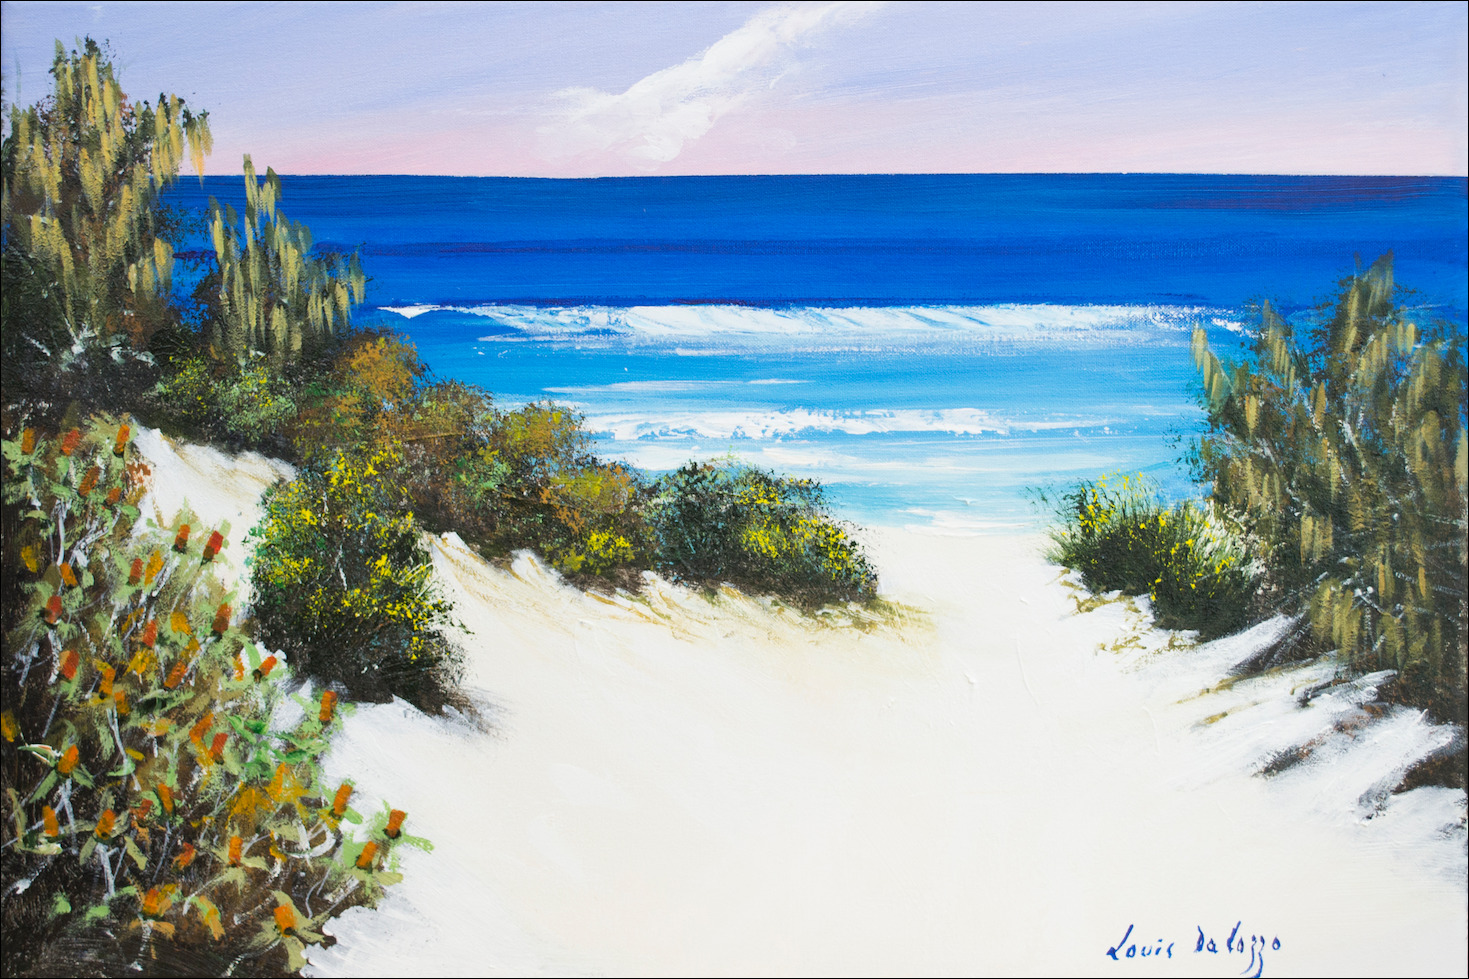 Beach Seascape Painting "A Brand New Day Straddie" by Louis Dalozzo